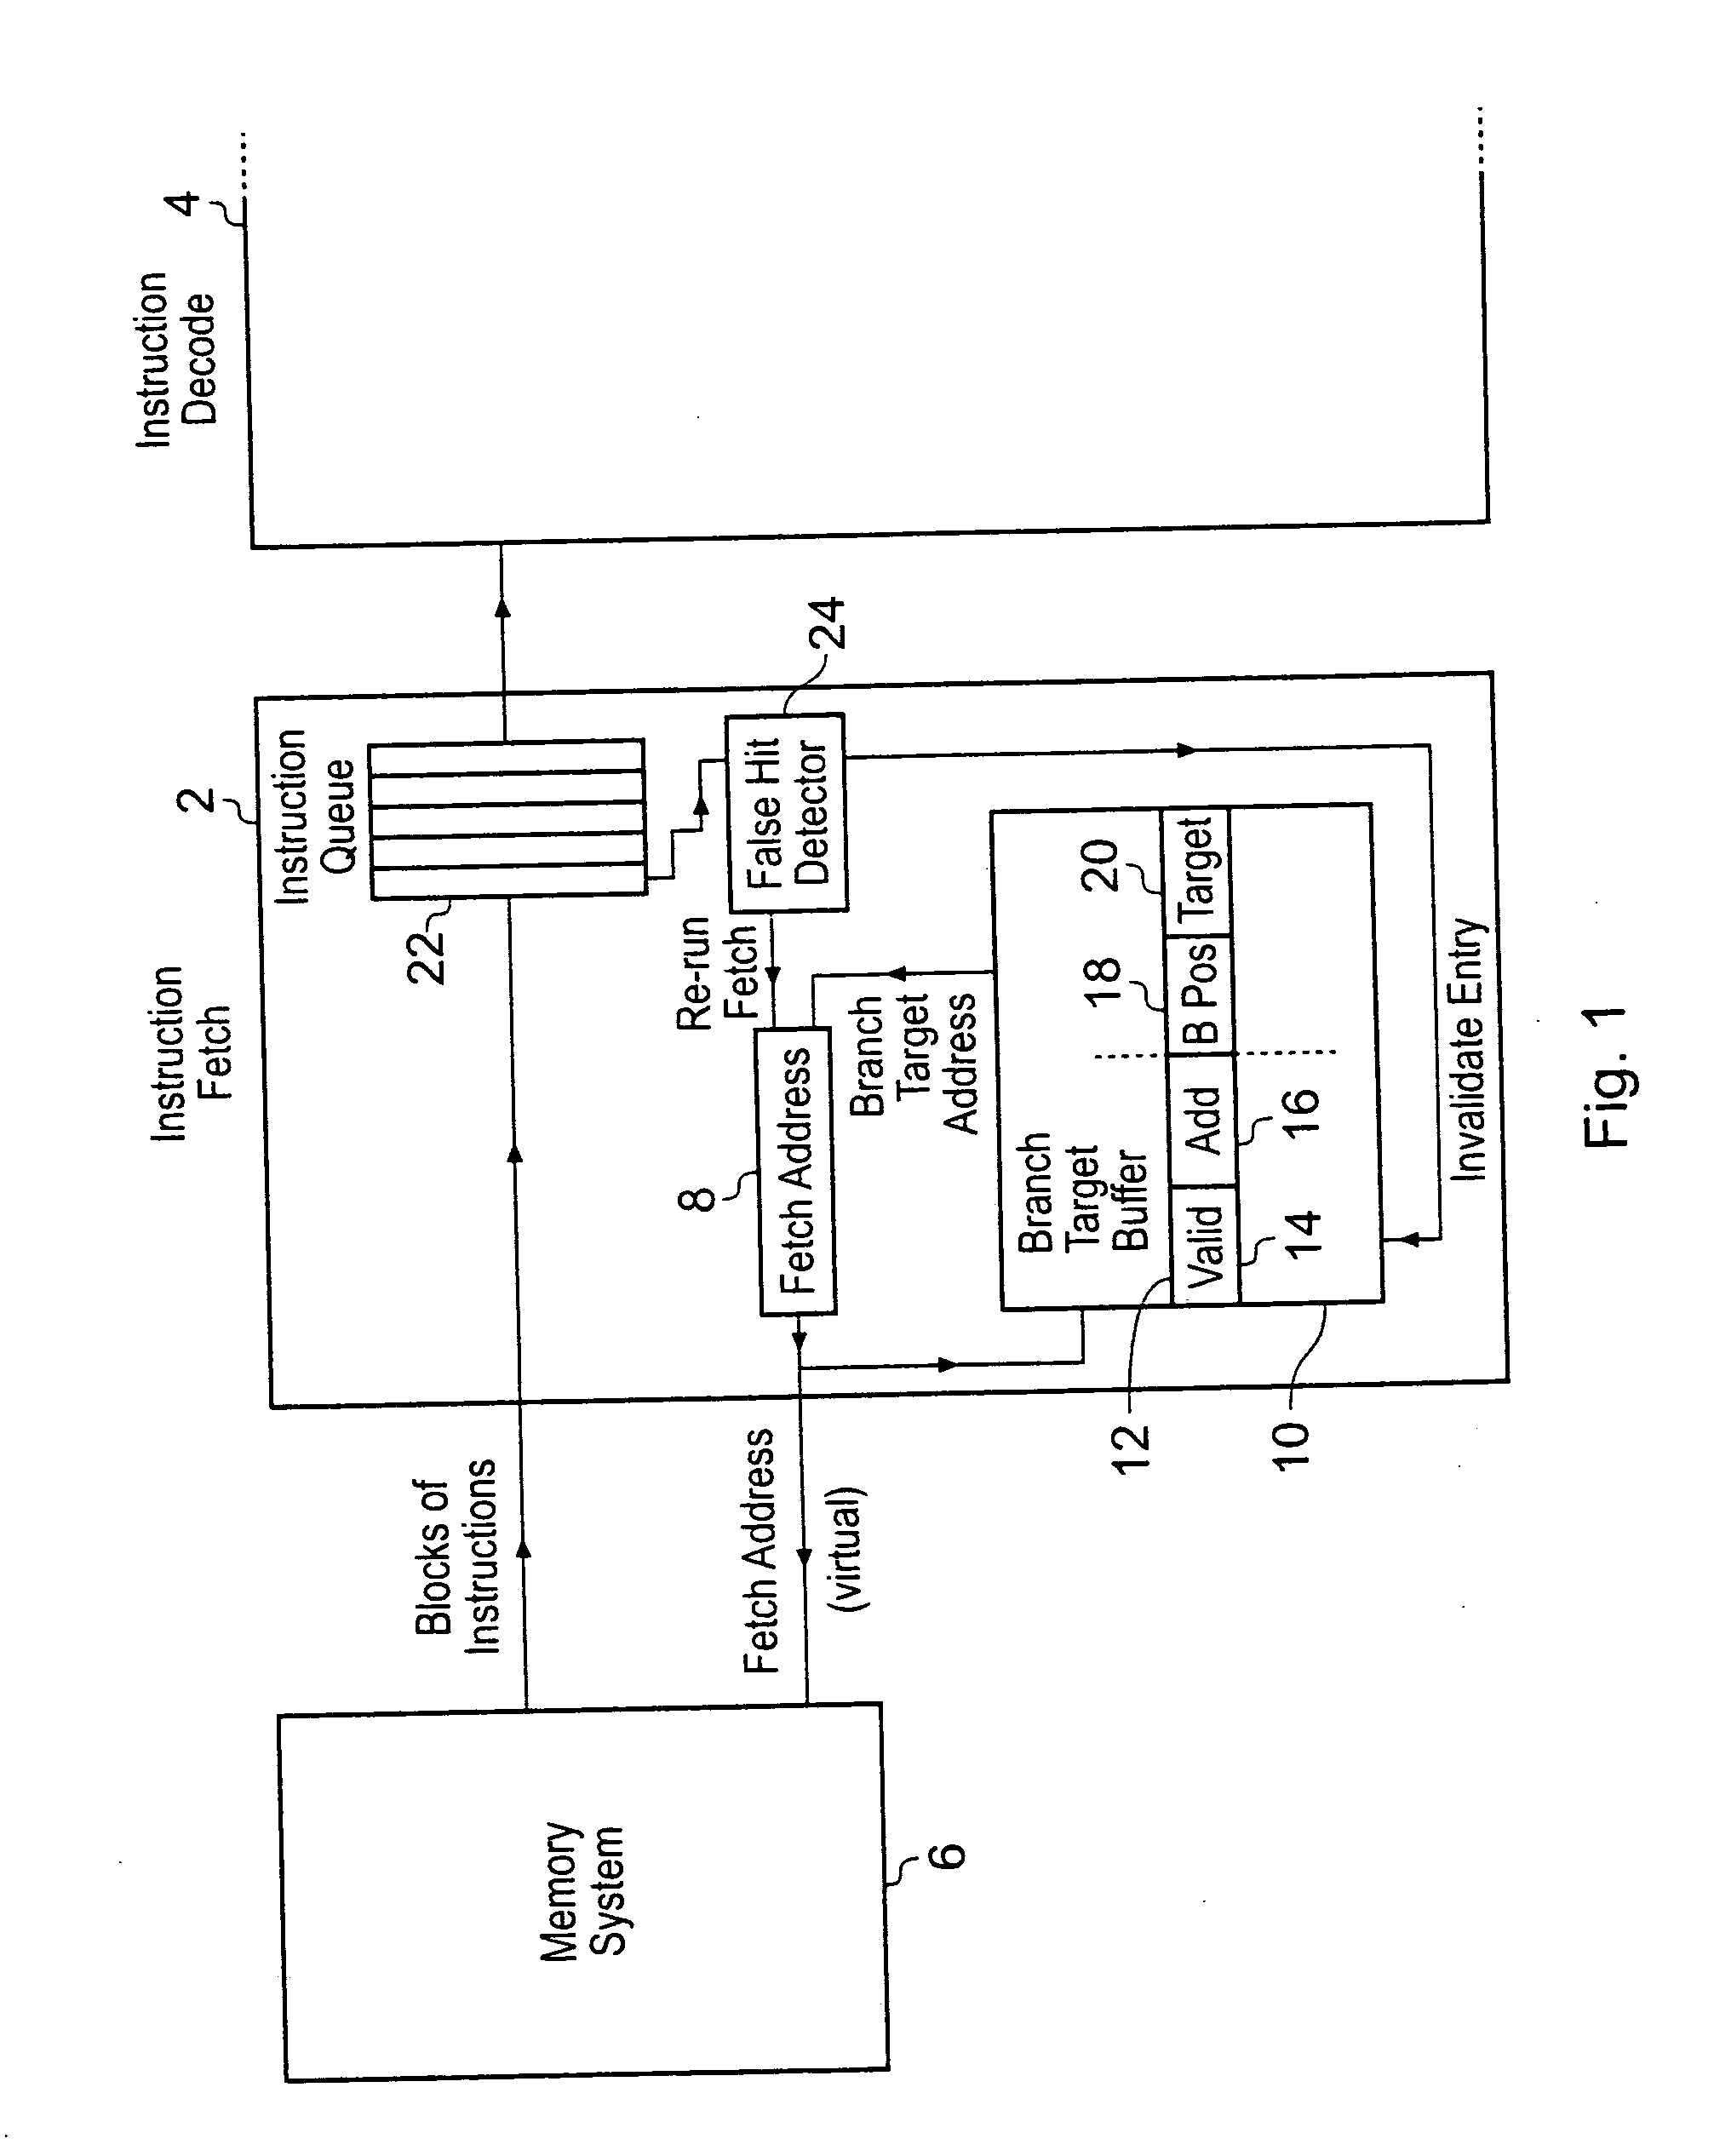 Context switching within a data processing system having a branch prediction mechanism